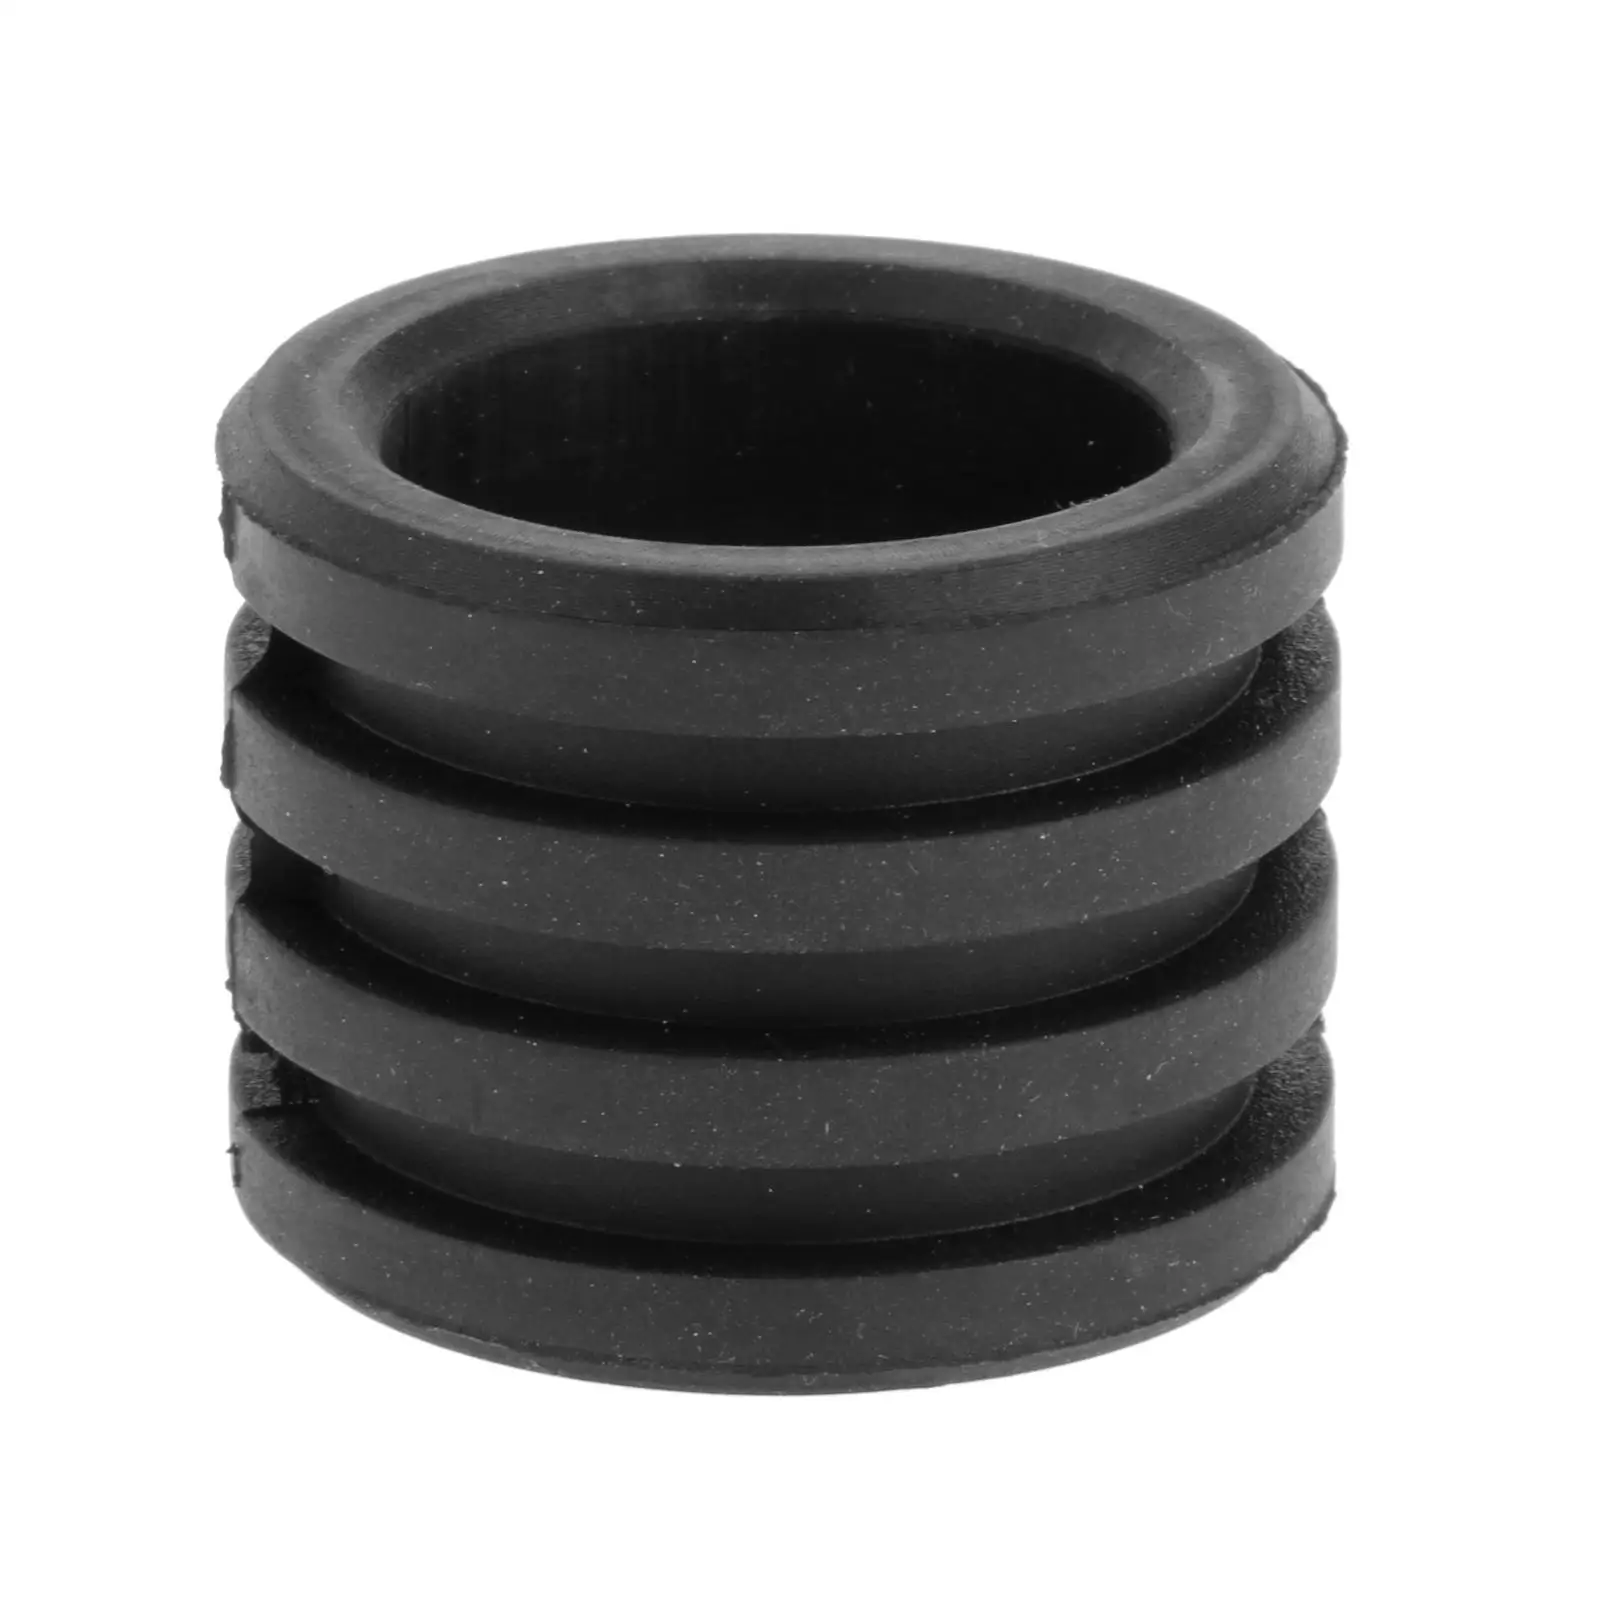 Exhaust Gasket Rubber Flange for 1984-07 18365 KA4 730 2-stroke, Simple Installation,Compact Lightweight